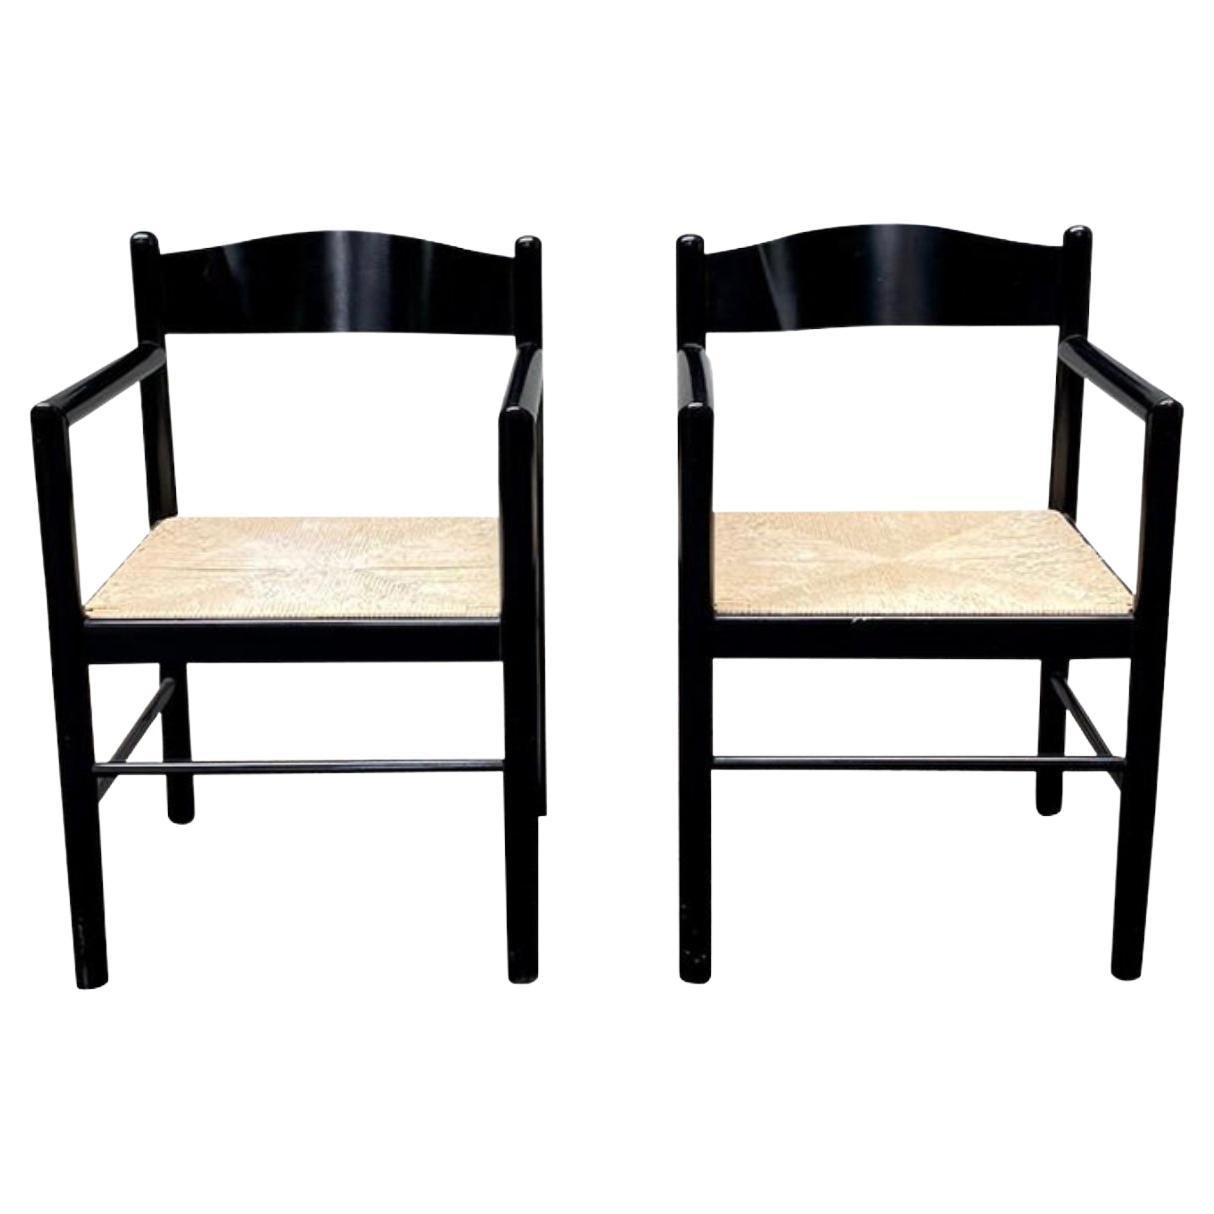 Massimo and Lella Vignelli Black Lacquered Acorn Armchairs - A Pair For Sale